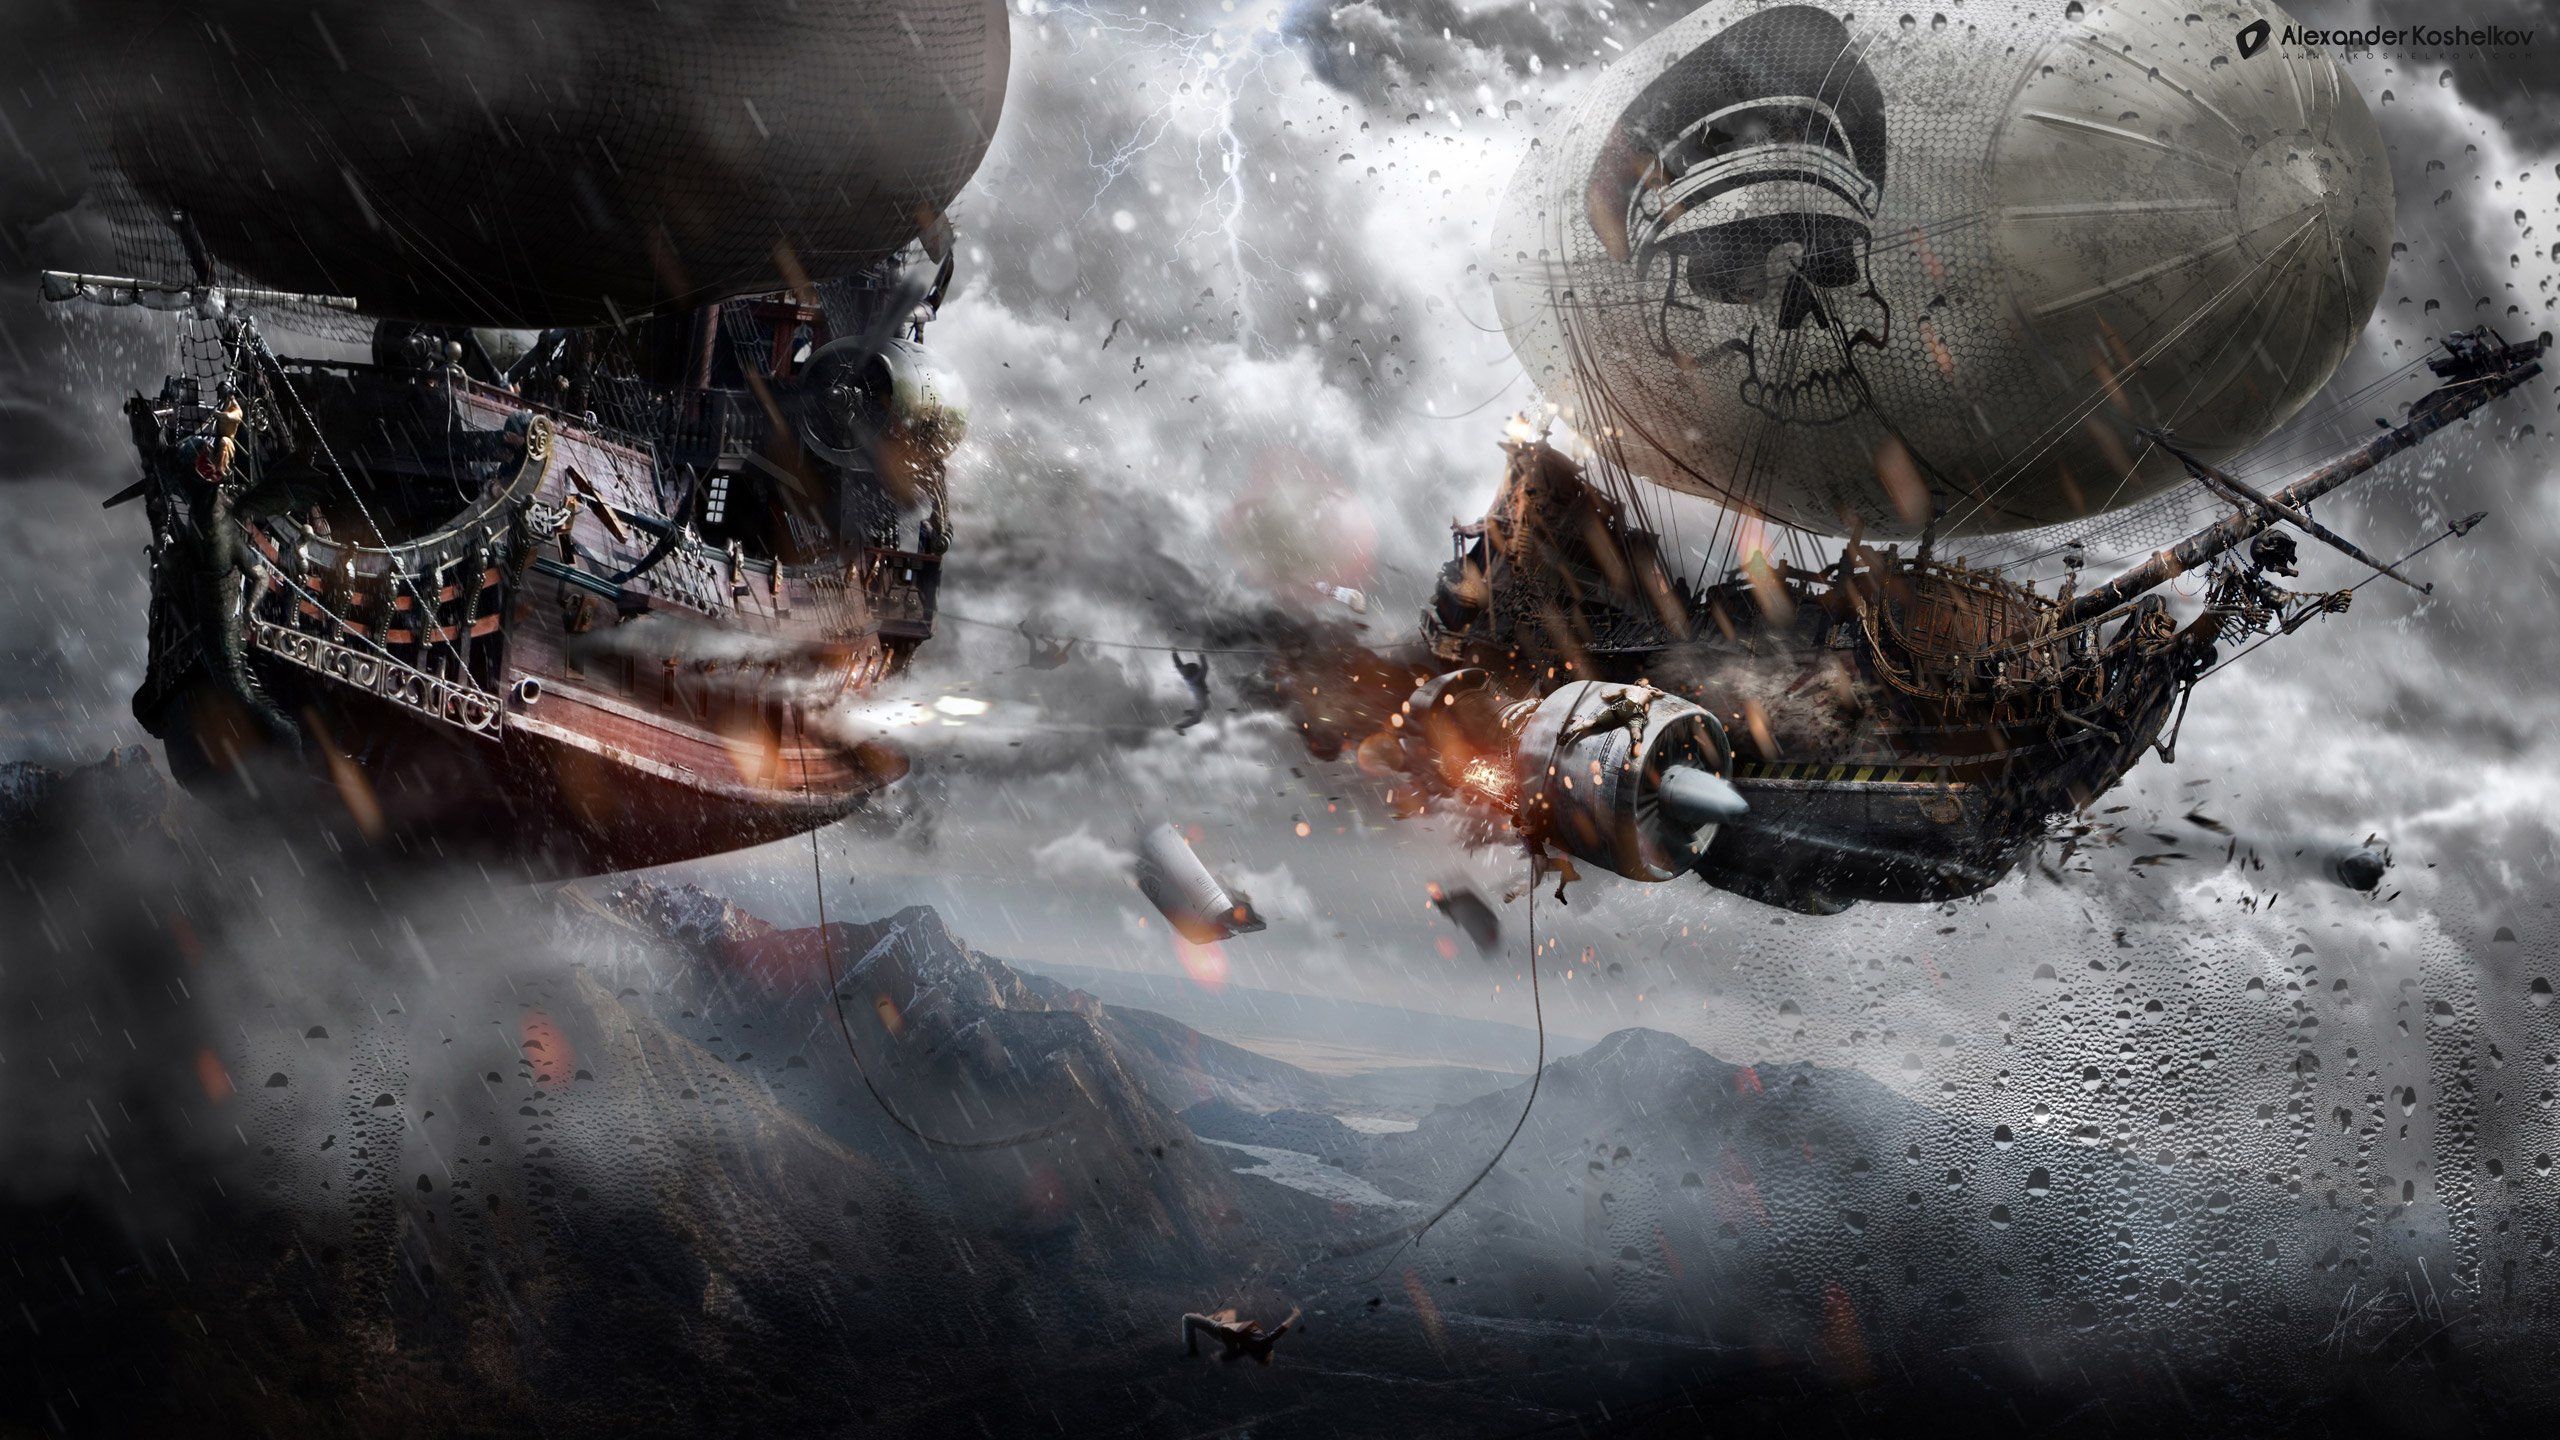 Steampunk airships fighting in the sky wallpaper - Pirate